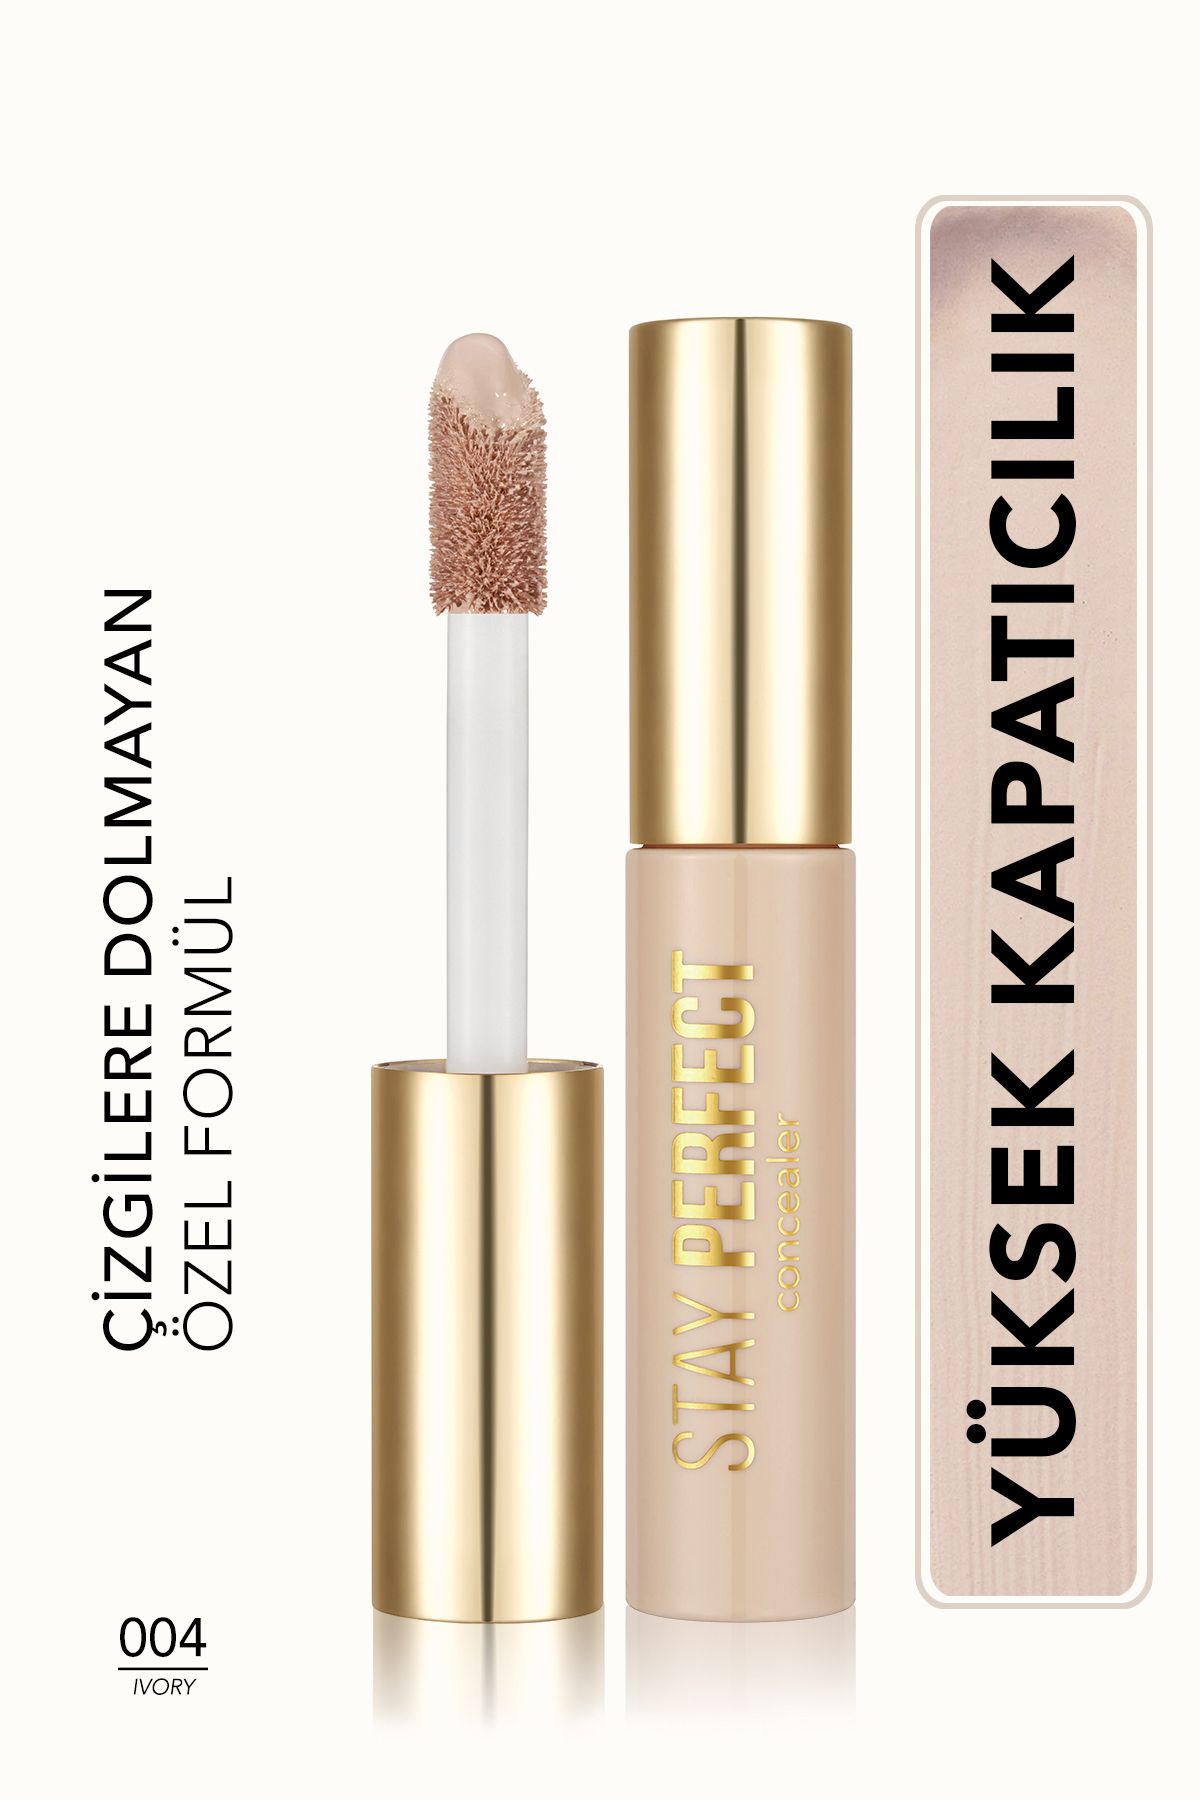 Flormar NATURAL FİNİSH (COOL UNDERTONE) - SKİN BRİGHTENİNG STAY PERFECT CONCEALER - 004 IVORY - PSSN2039